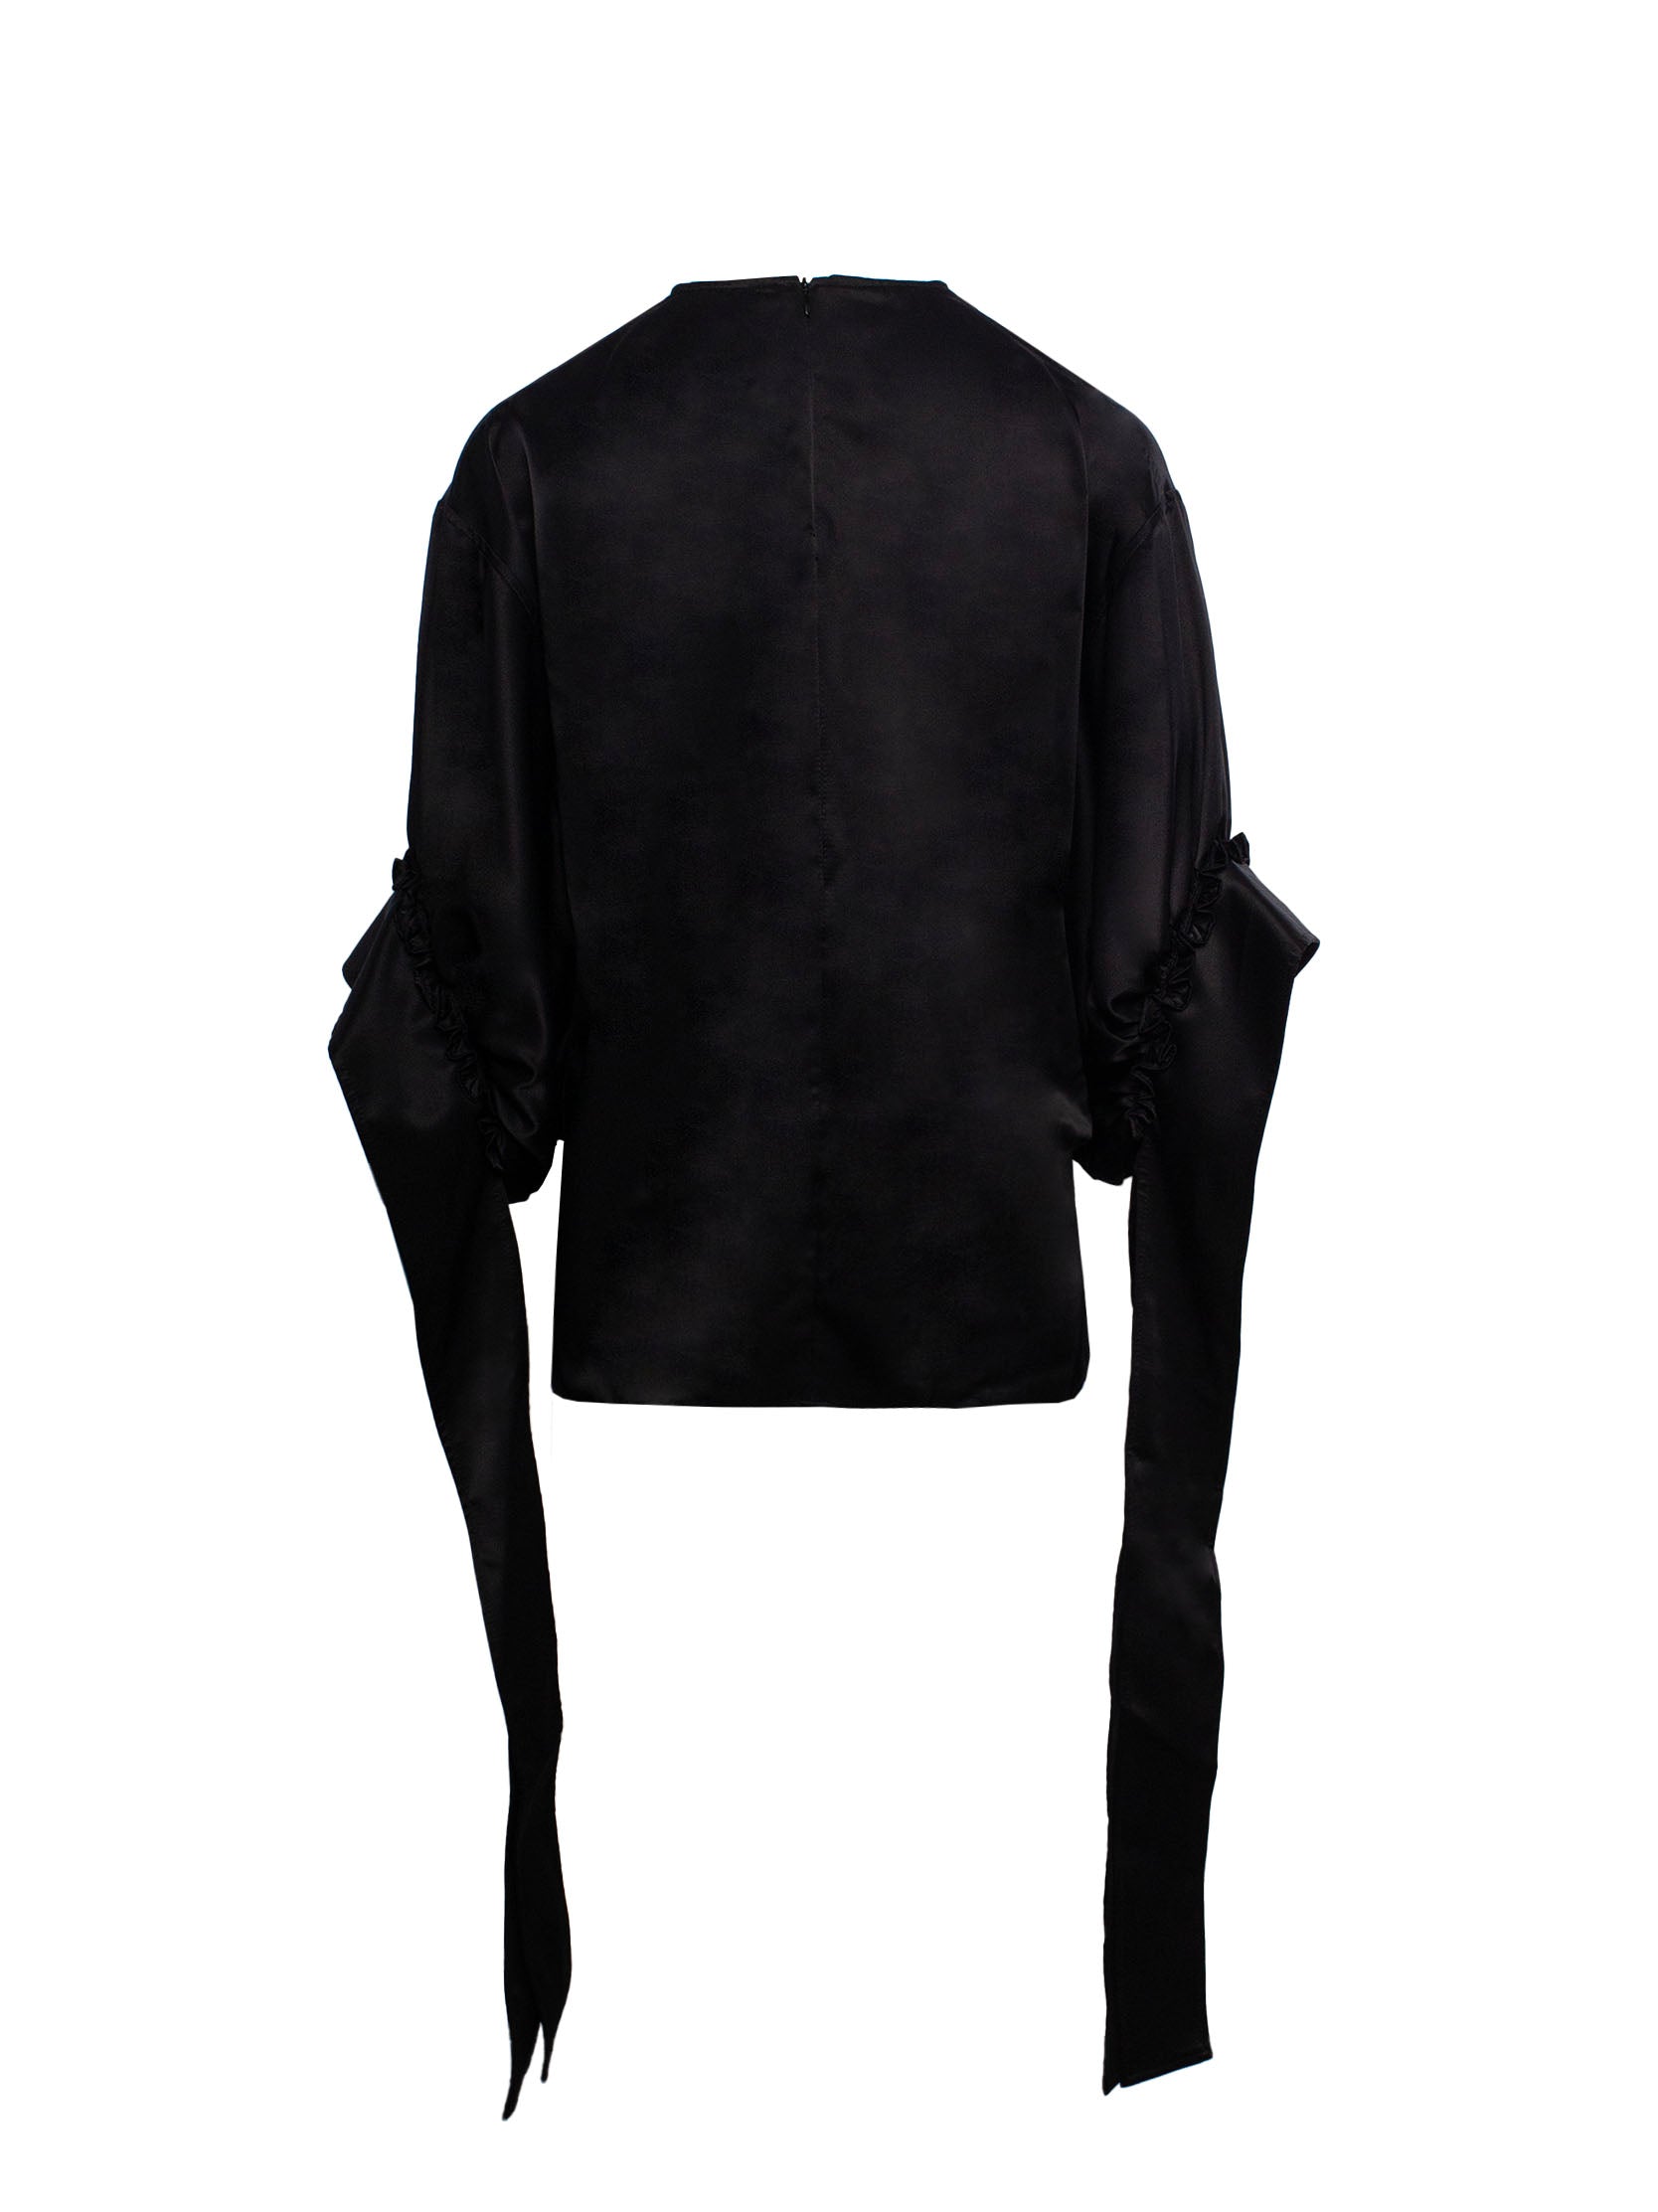 JW ANDERSON SATIN-FINISH PLEATED BLOUSE